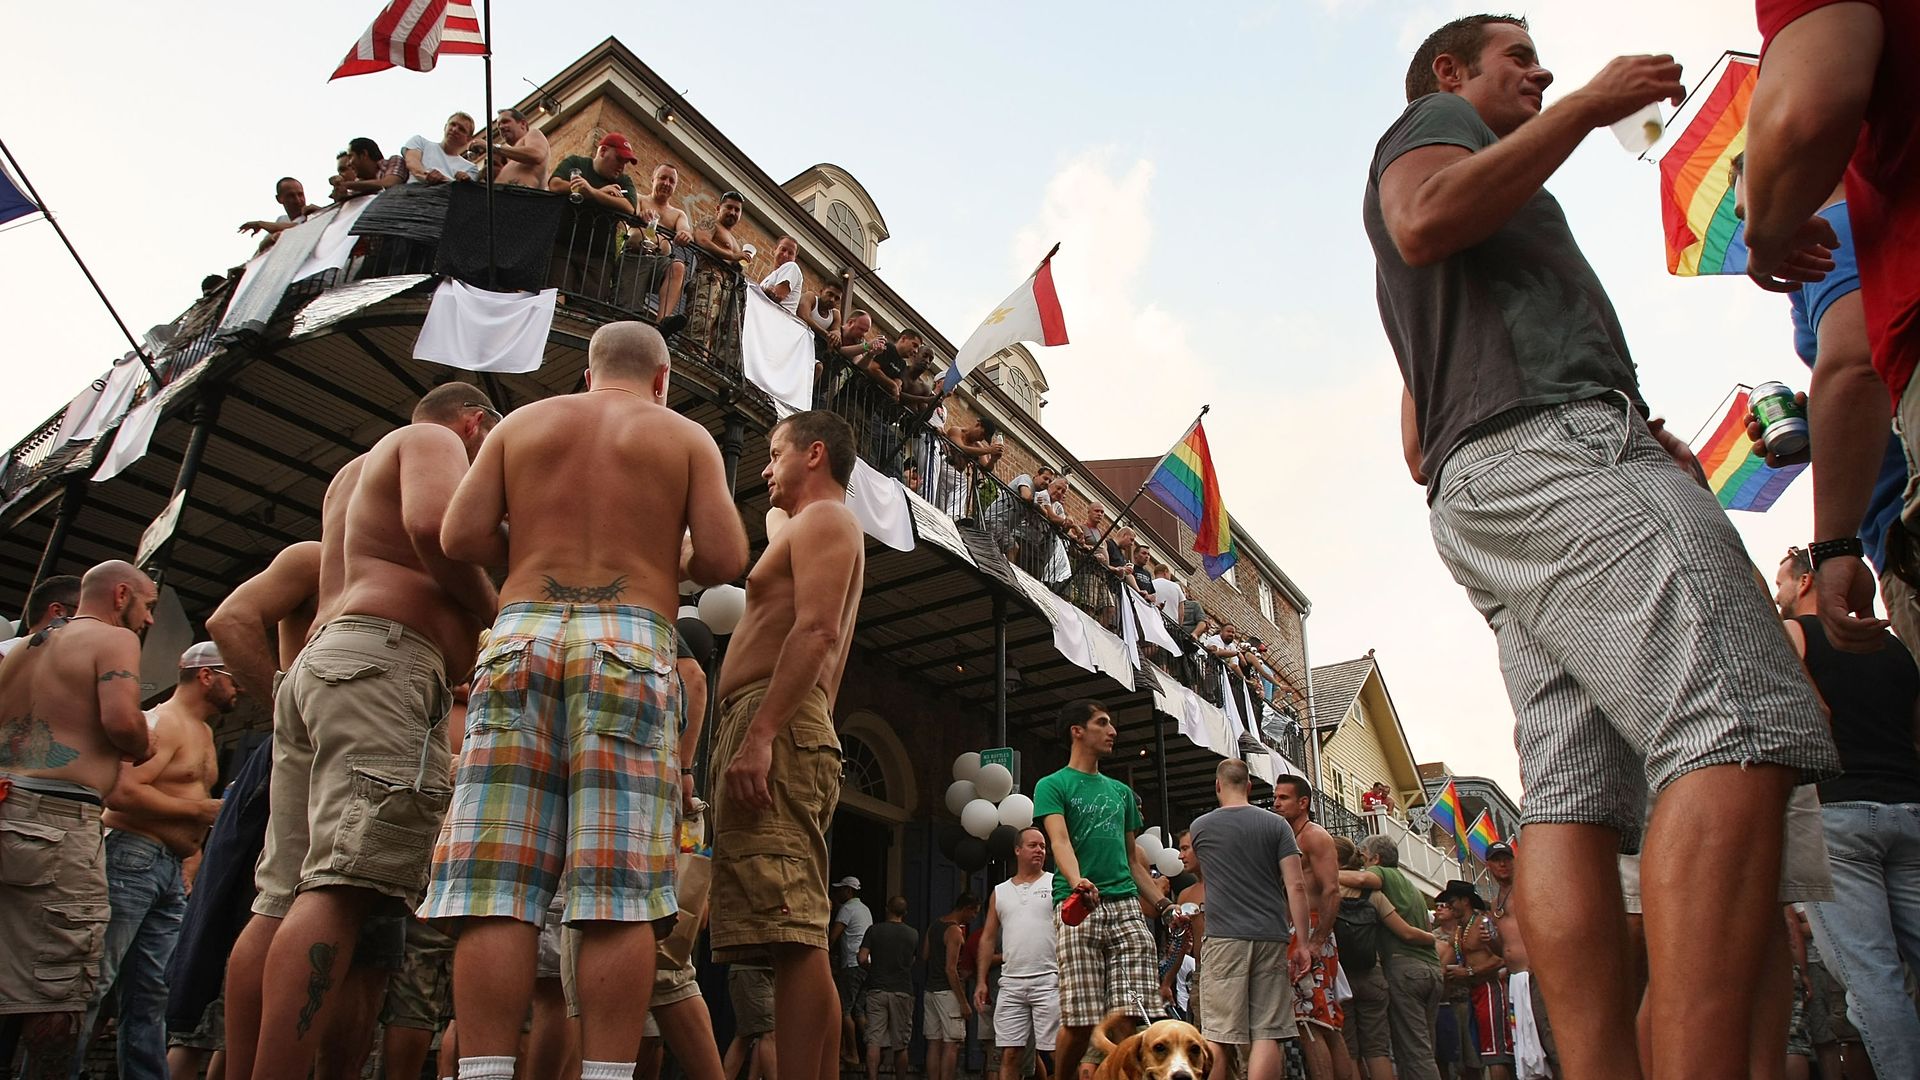 A French Quarter street is filled with revelers. Gay pride flags hang from a nearby balcony.